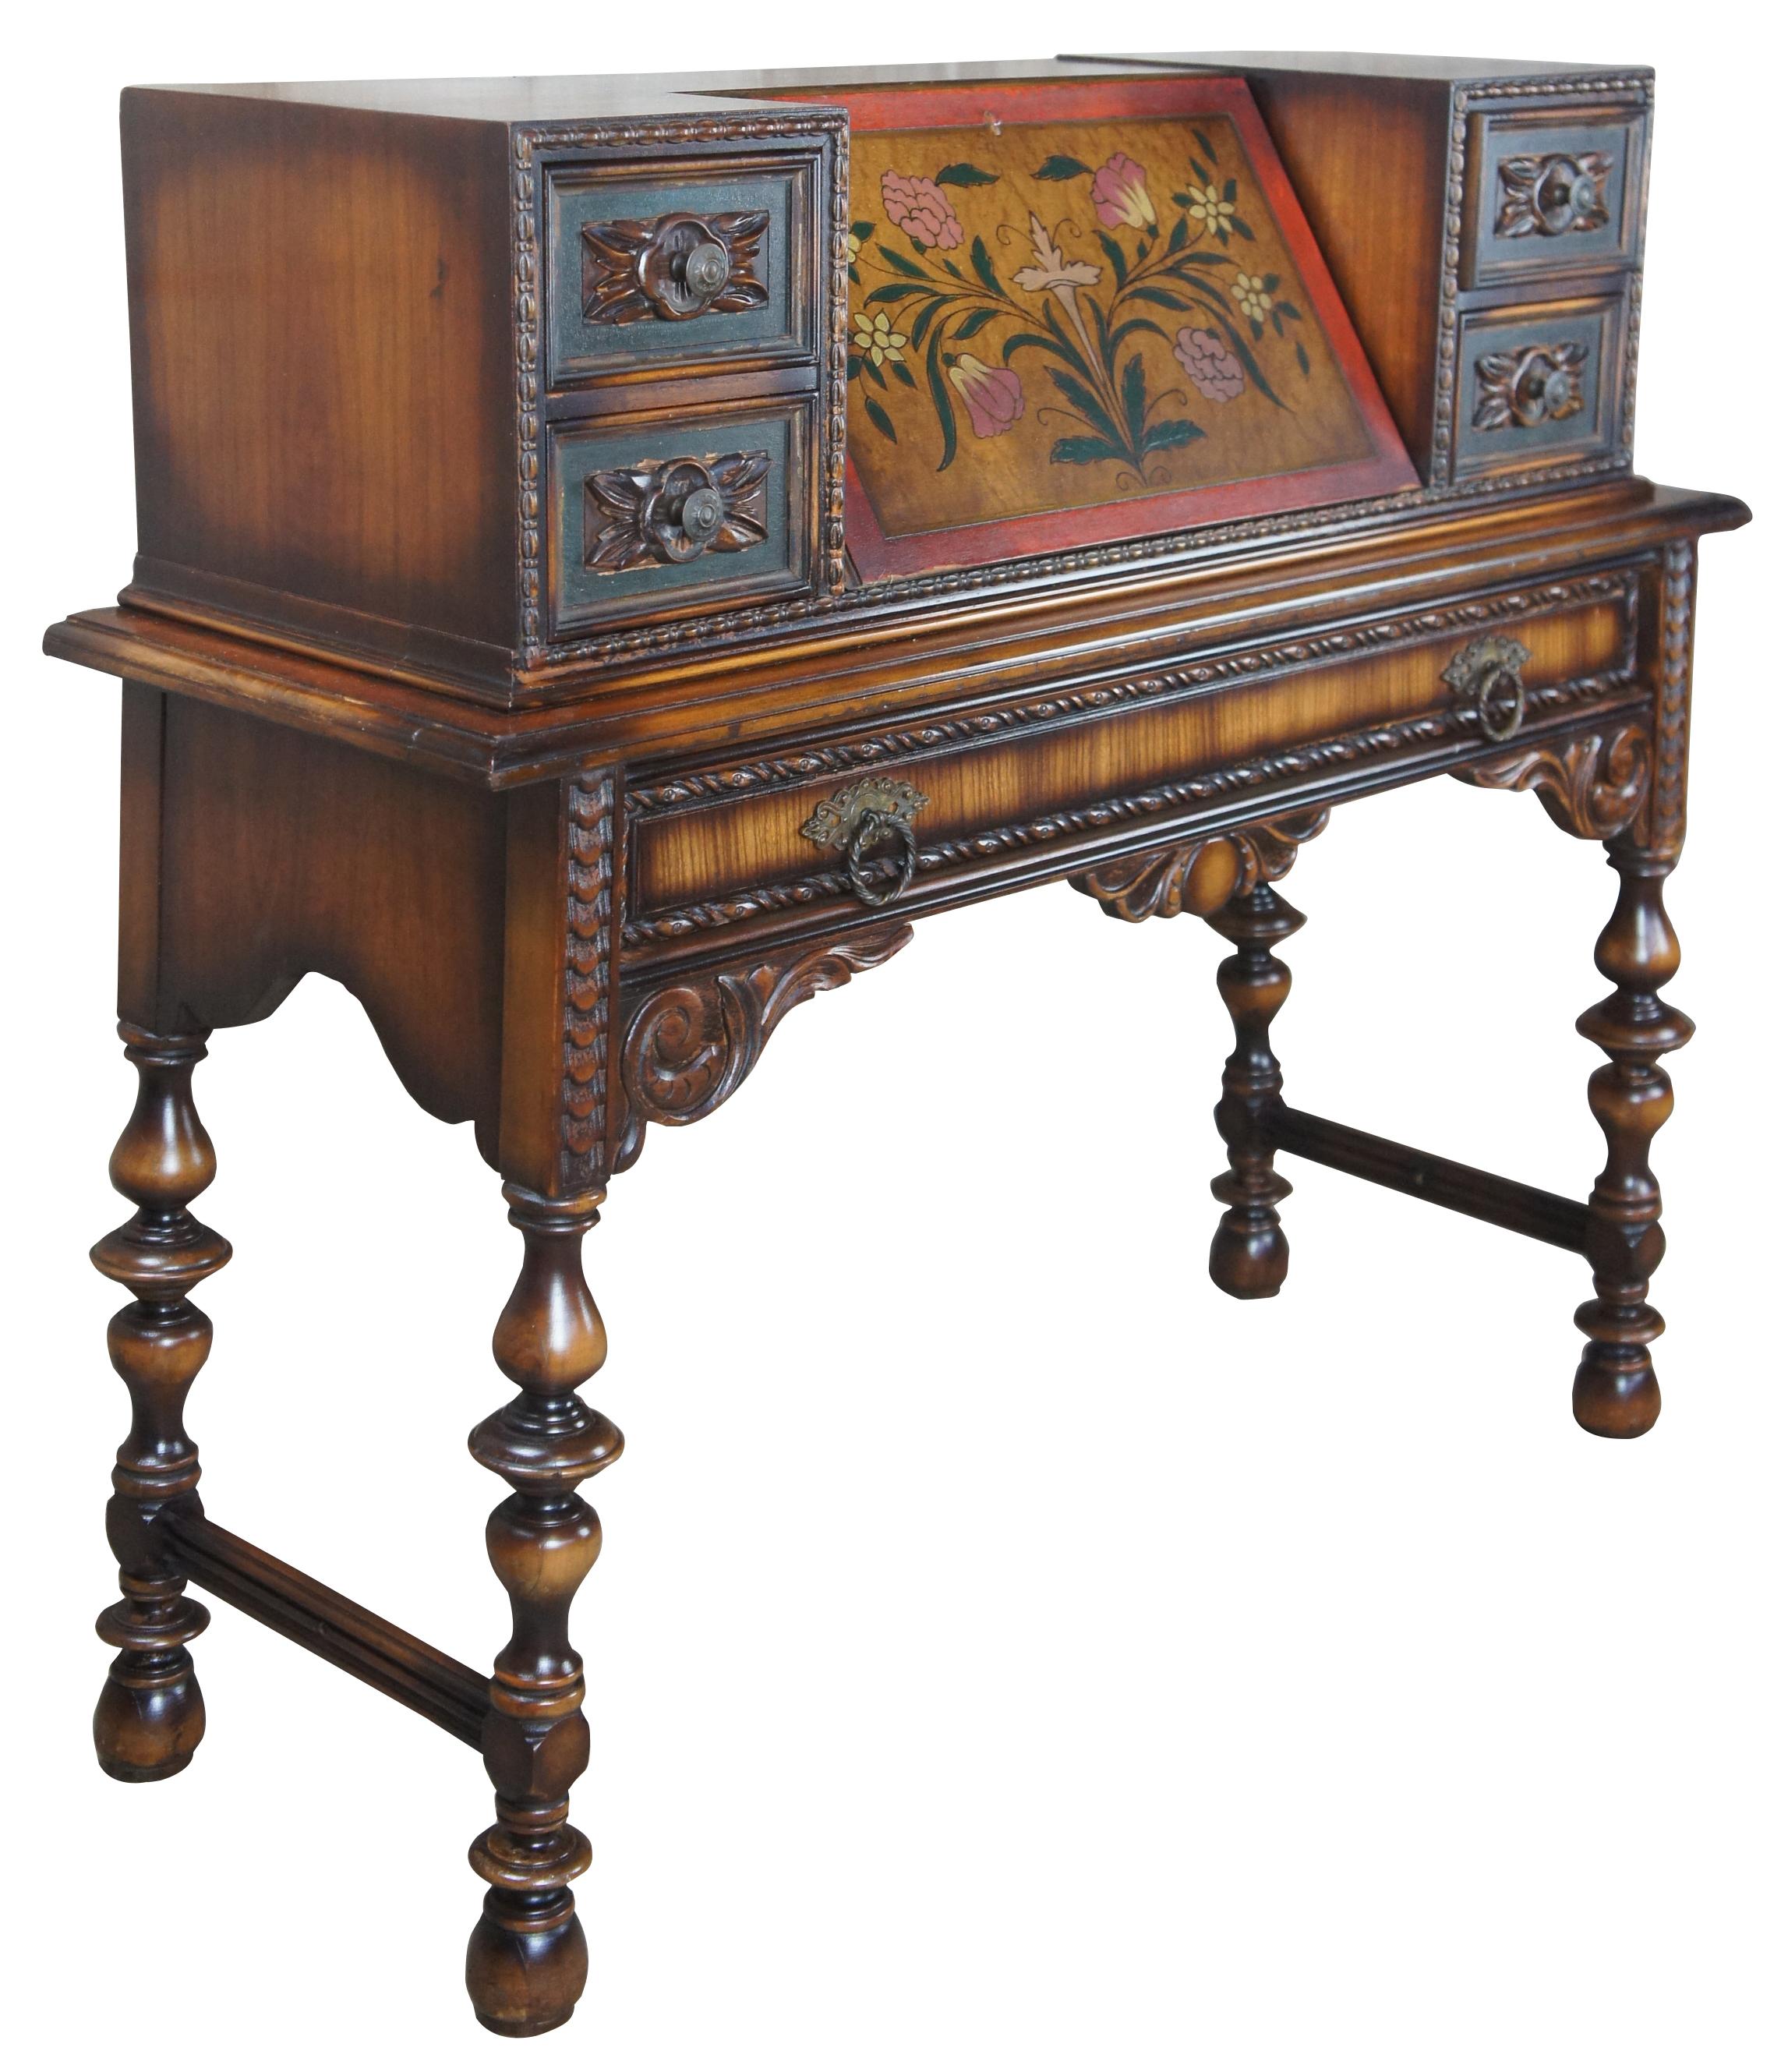 20th century Jacobean / Spanish Revival secretary desk. Made from walnut with hand carved and painted detail. Features five drawers and interior cubbies for storage. Attributed to Berkey and Gay Furniture Co. of Grand Rapids Michigan.
   